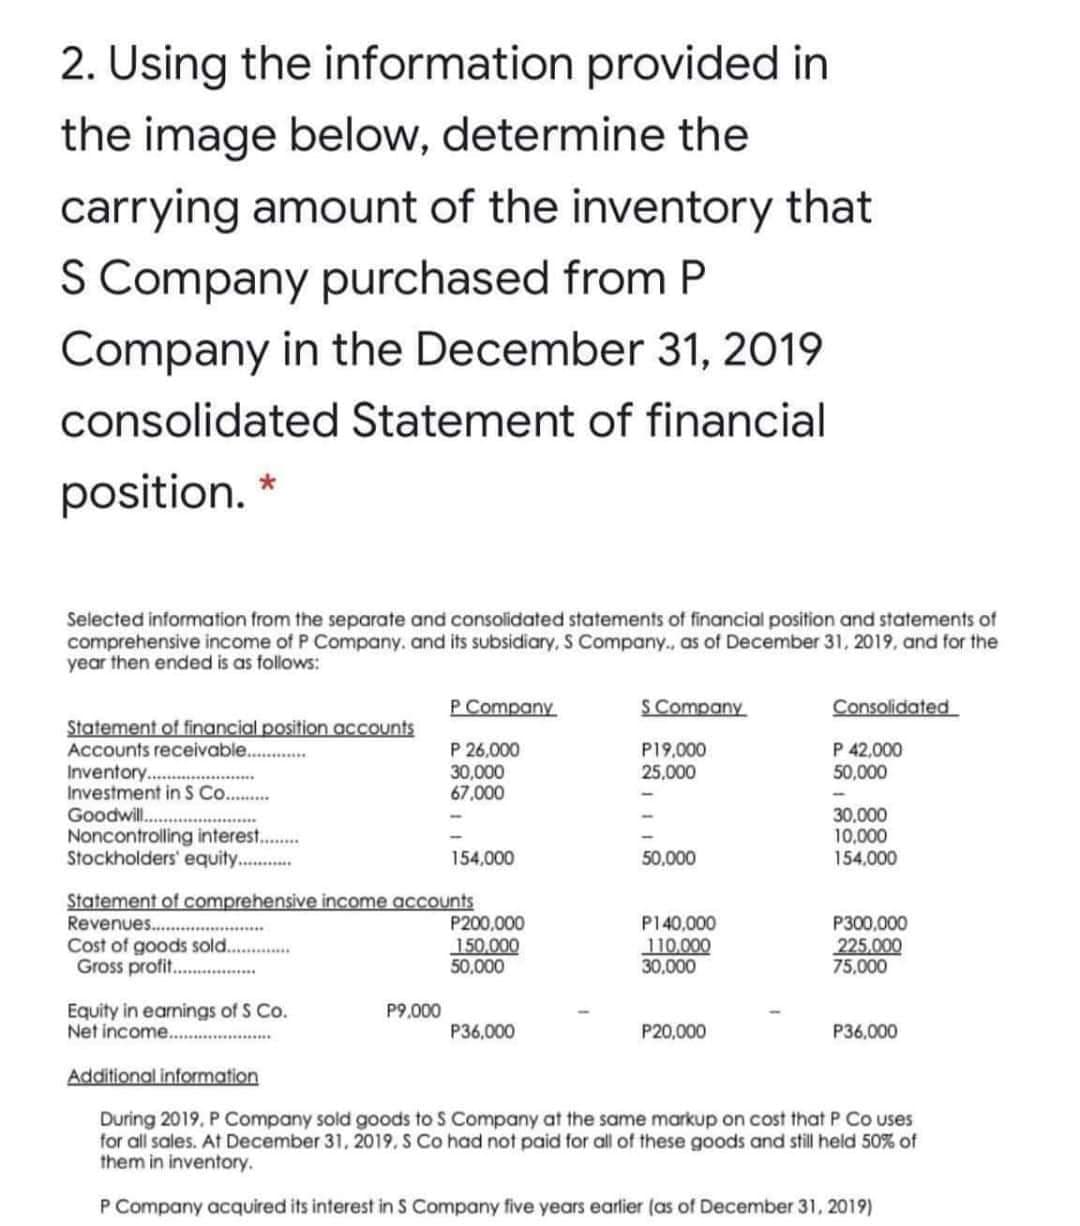 2. Using the information provided in
the image below, determine the
carrying amount of the inventory that
S Company purchased from P
Company in the December 31, 2019
consolidated Statement of financial
position. *
Selected information from the separate and consolidated statements of financial position and statements of
comprehensive income of P Company. and its subsidiary, S Company., as of December 31, 2019, and for the
year then ended is as follows:
P Company
S Company
Consolidated
Statement of financial position accounts
Accounts receivable. .
Inventory....
Investment in S Co...
Goodwill.
P 42,000
50,000
P 26,000
P19,000
25.000
30,000
67.000
Noncontrolling interest..
Stockholders' equity..
30,000
10,000
154,000
154,000
50,000
Statement of comprehensive income accounts
Revenues...
Cost of goods sold.
Gross profit.
P300,000
225.000
75,000
P200,000
P140,000
150,000
50,000
110,000
30,000
Equity in earnings of S Co.
Net income..
P9.000
P36,000
P20,000
P36,000
Additional information
During 2019. P Company sold goods to S Company at the same markup on cost that P Co uses
for all sales. At December 31, 2019, S Co had not paid for all of these goods and still held 50% of
them in inventory.
P Company acquired its interest in S Company five years eartlier (as of December 31, 2019)
